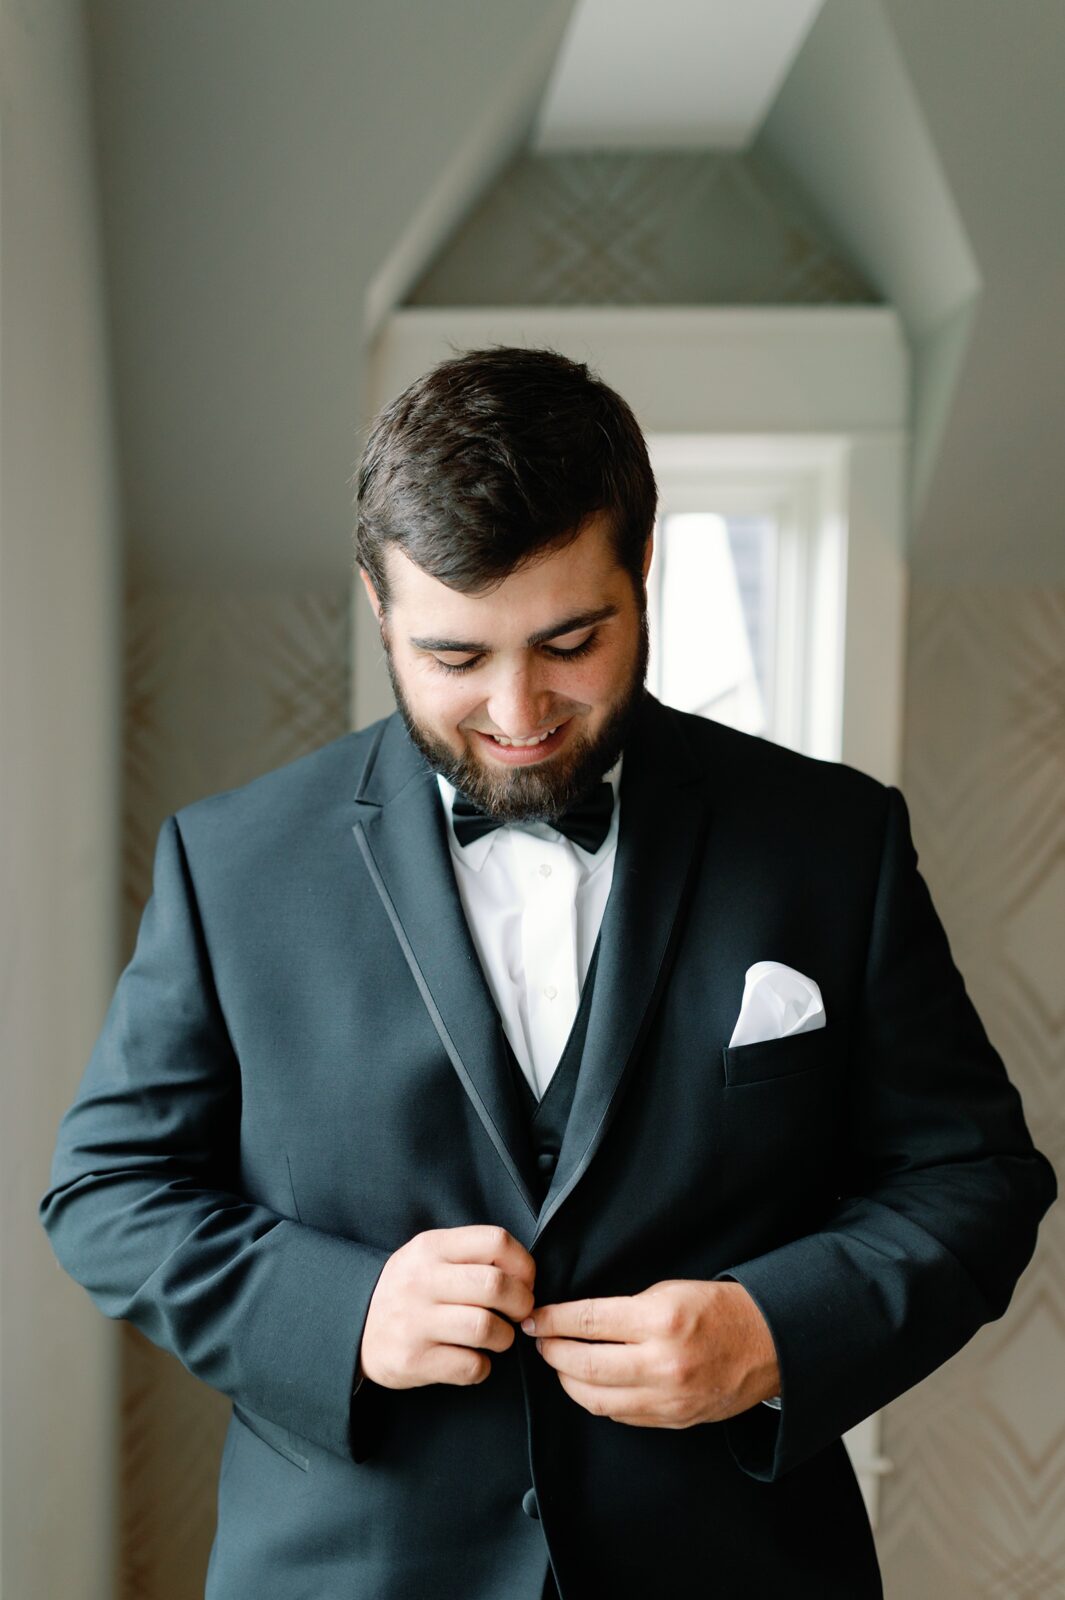 Groom smiling down as he button his suit jacket on his wedding day.